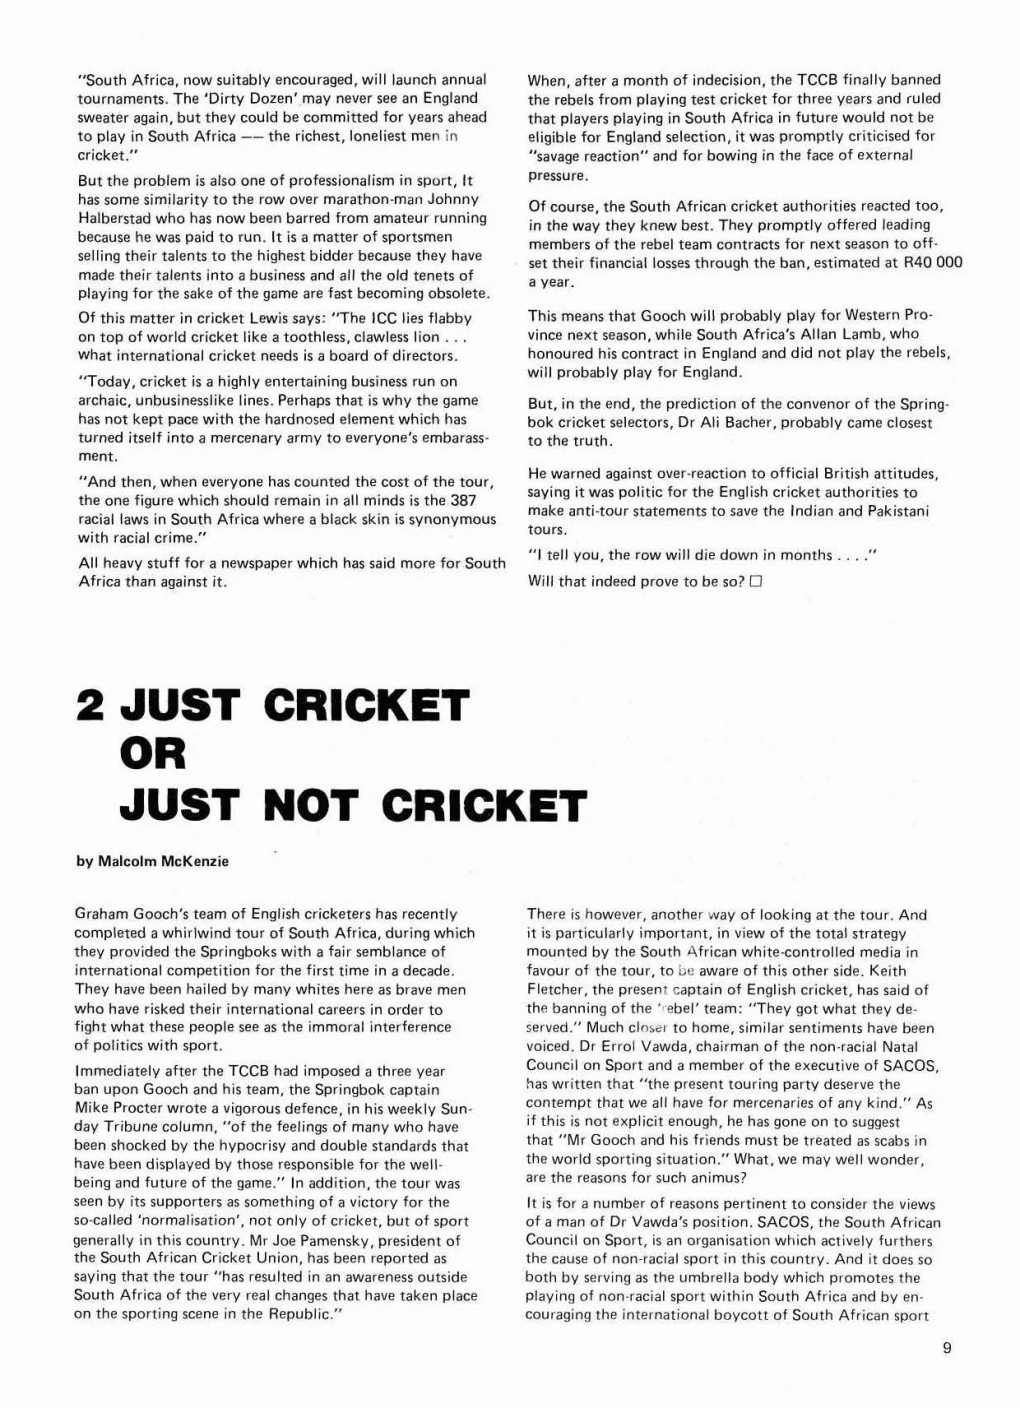 2 JUST CRICKET OR JUST NOT CRICKET by Malcolm Mckenzi E